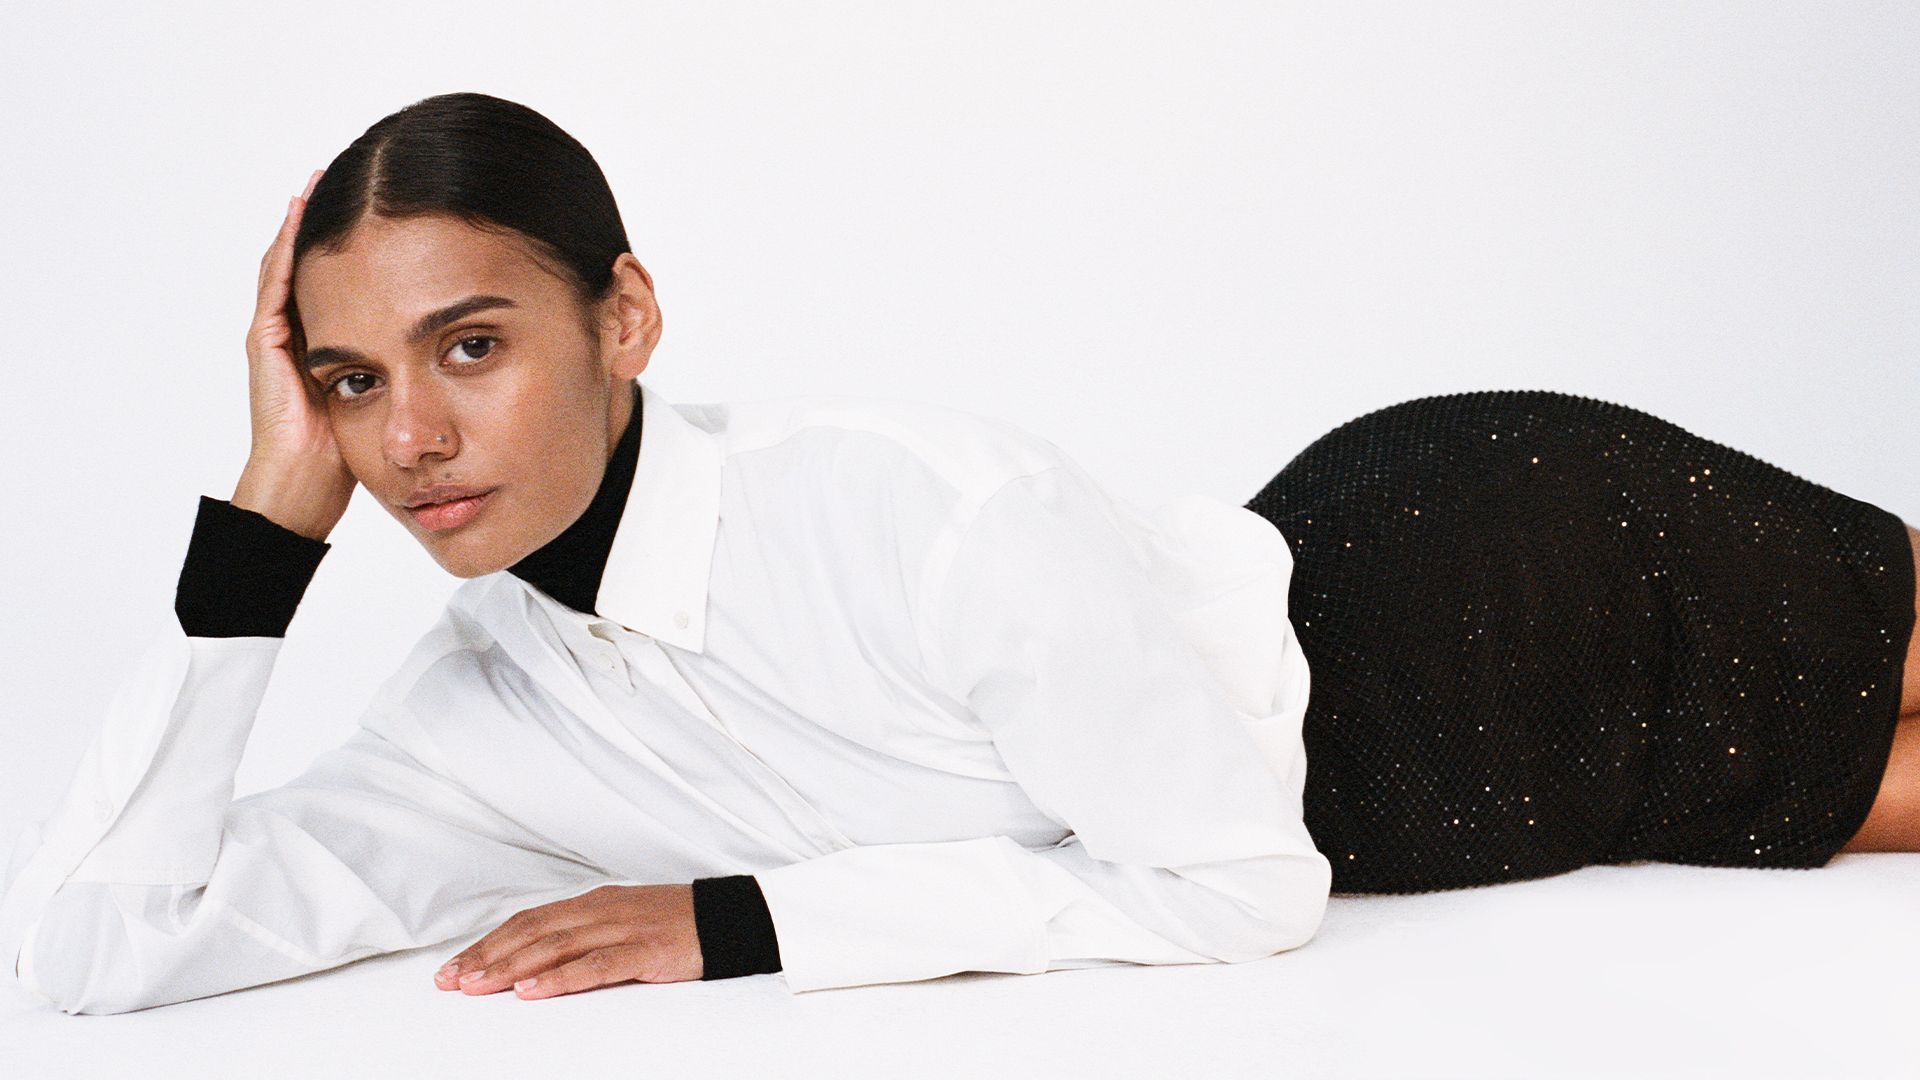 Madeleine Madden lying down on the ground with hand on head wearing a white button-up shirt and sparkly black mini skirt